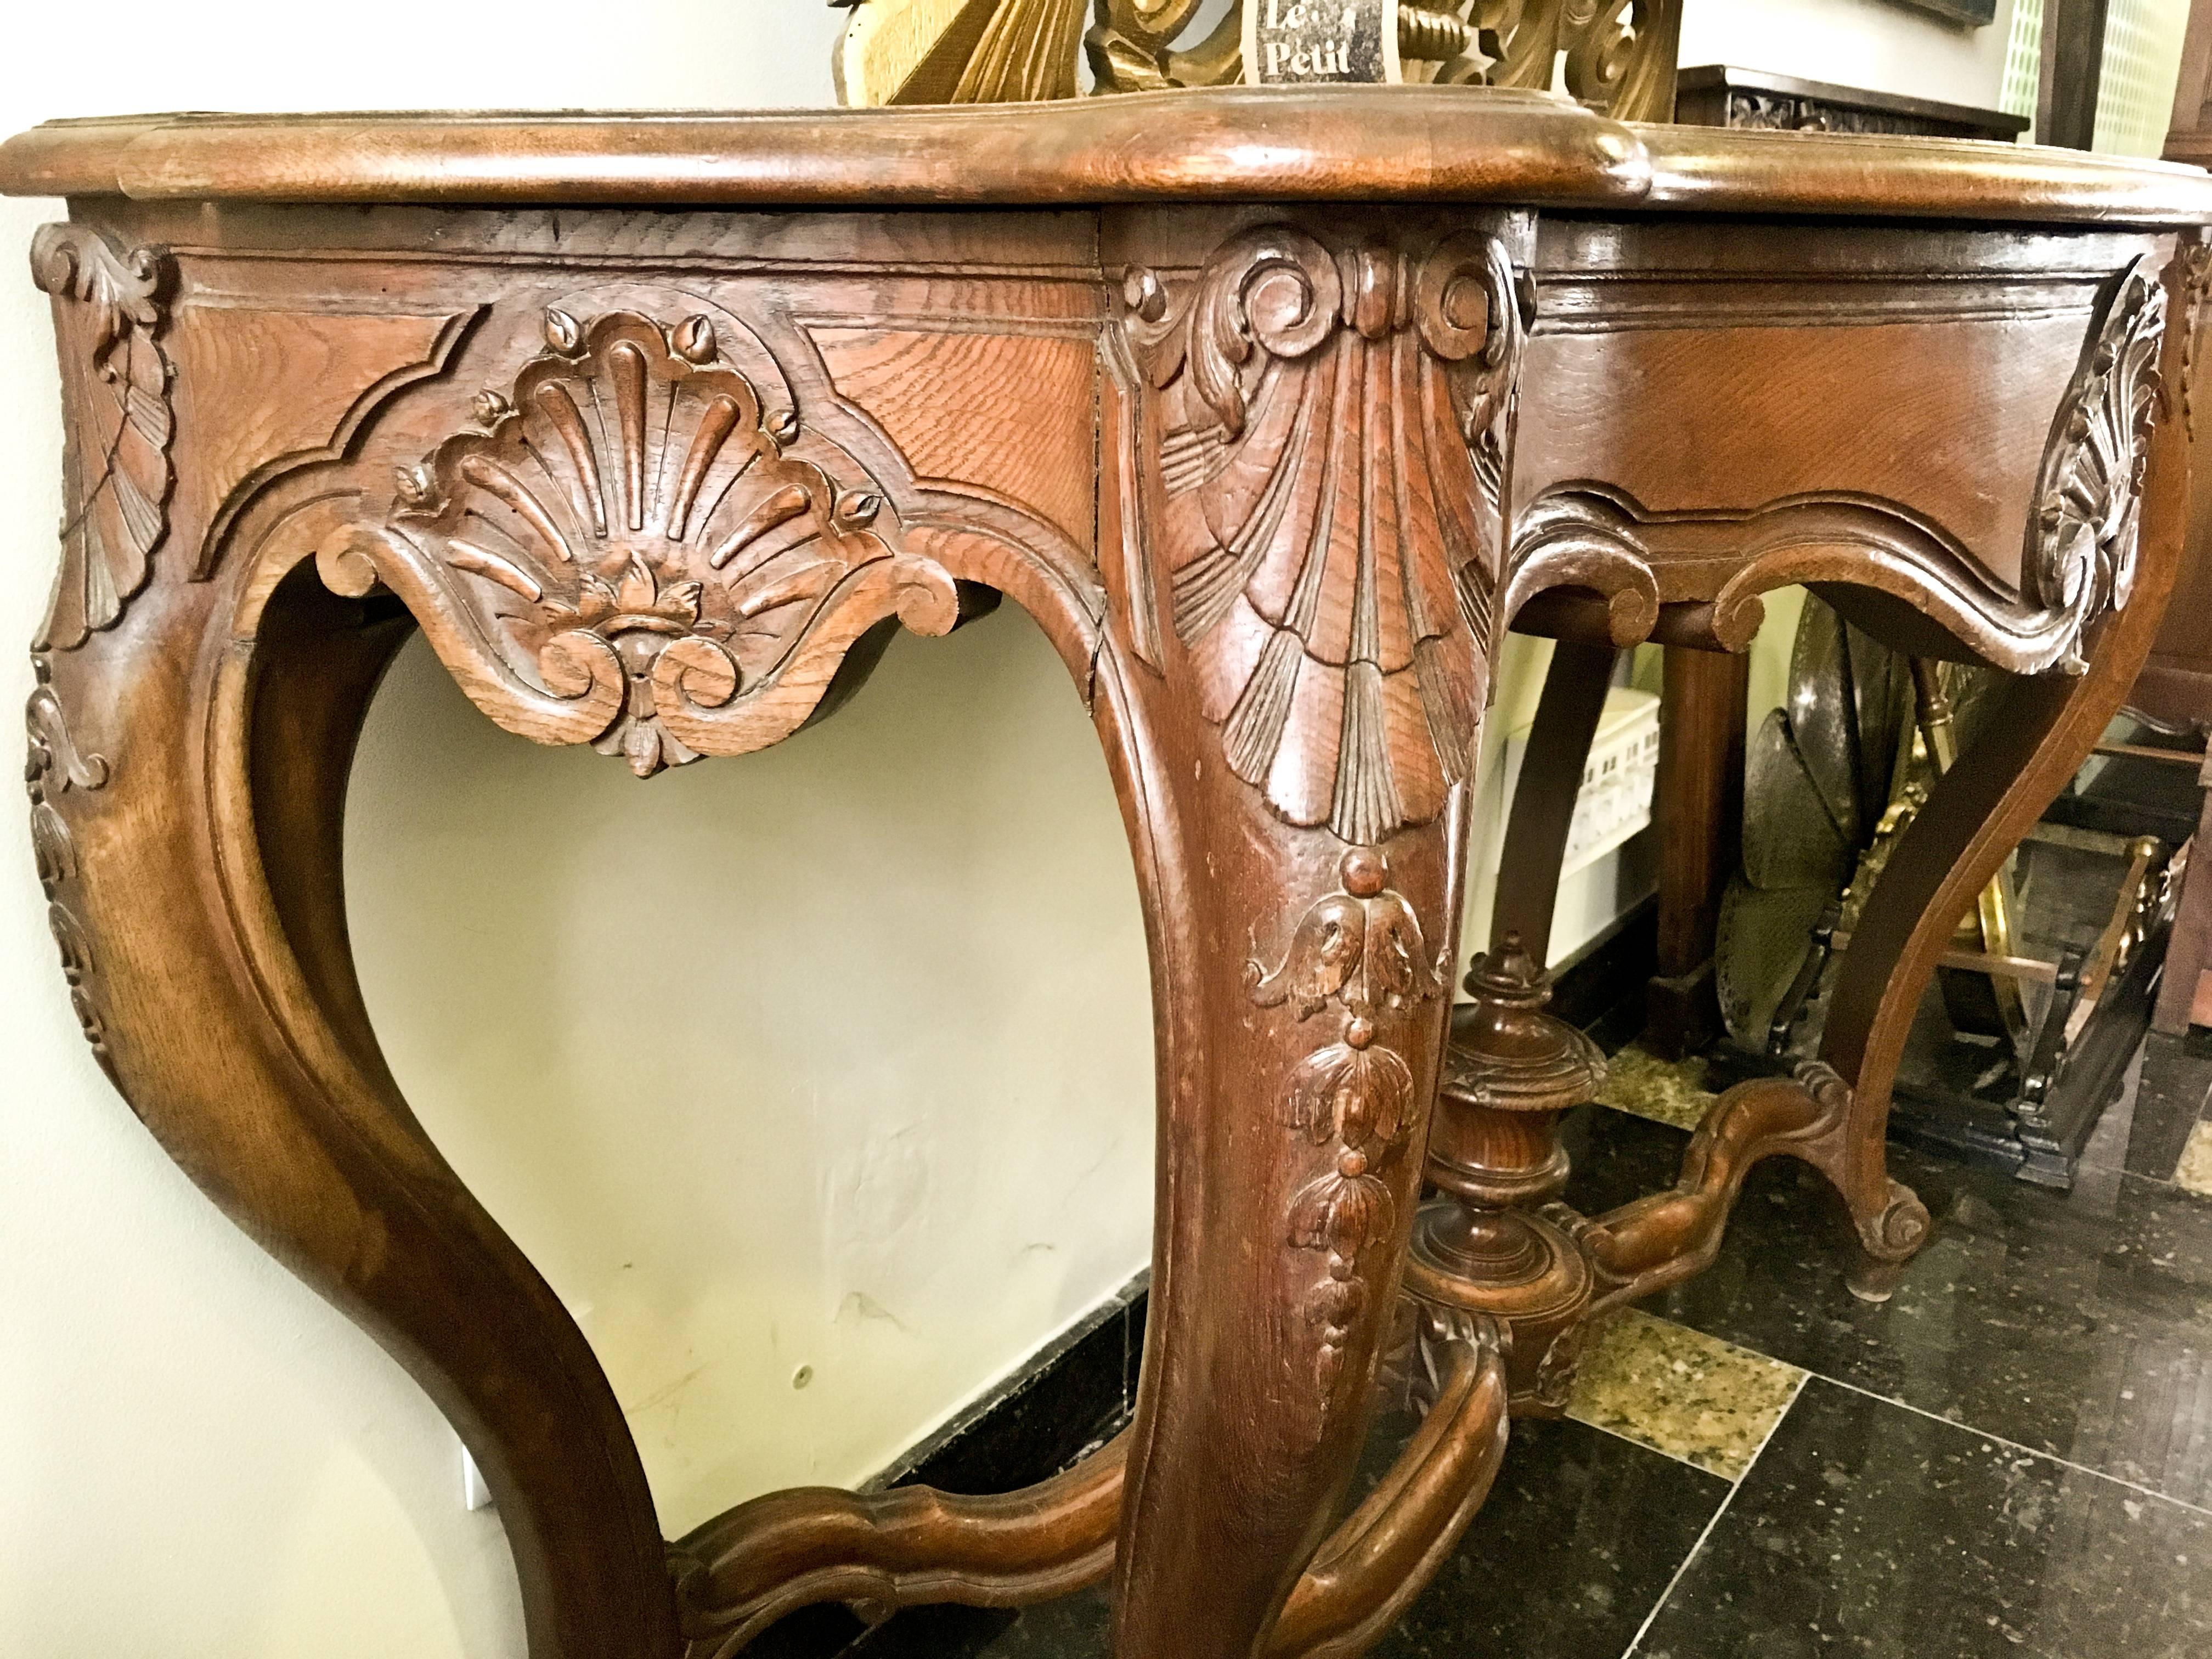 19th century French Regence style beautifully carved with leaves walnut console. Red marble top with hidden drawer underneath, over hand-carved frieze supported by four cabriole legs connected by X-form stretchers centered by large urn. Very massive